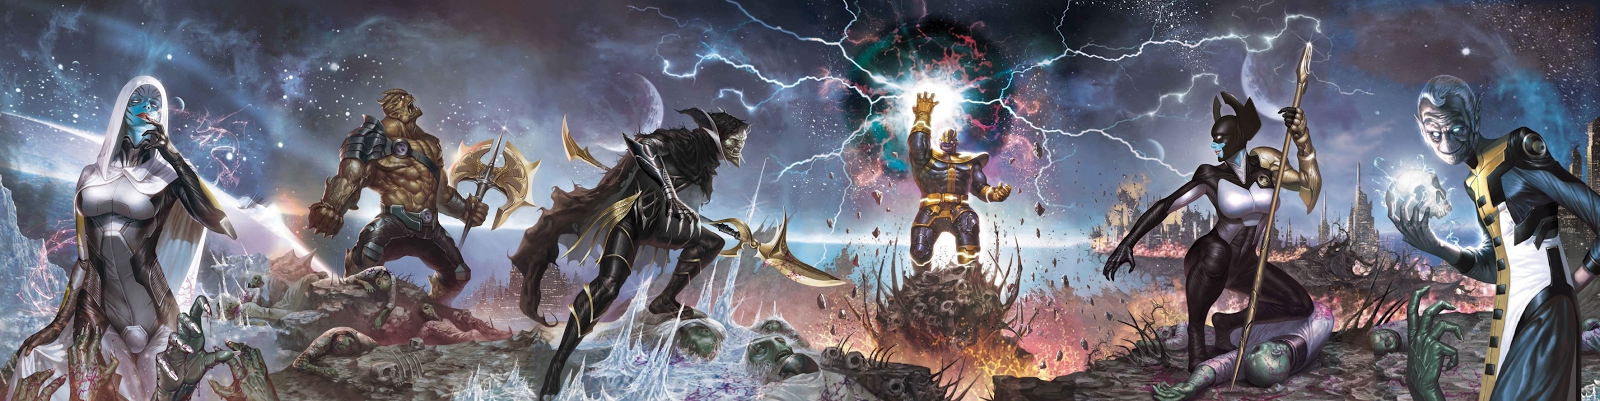 Marvel-Infinity-TheBlackOrder-Thanos-Poster.png